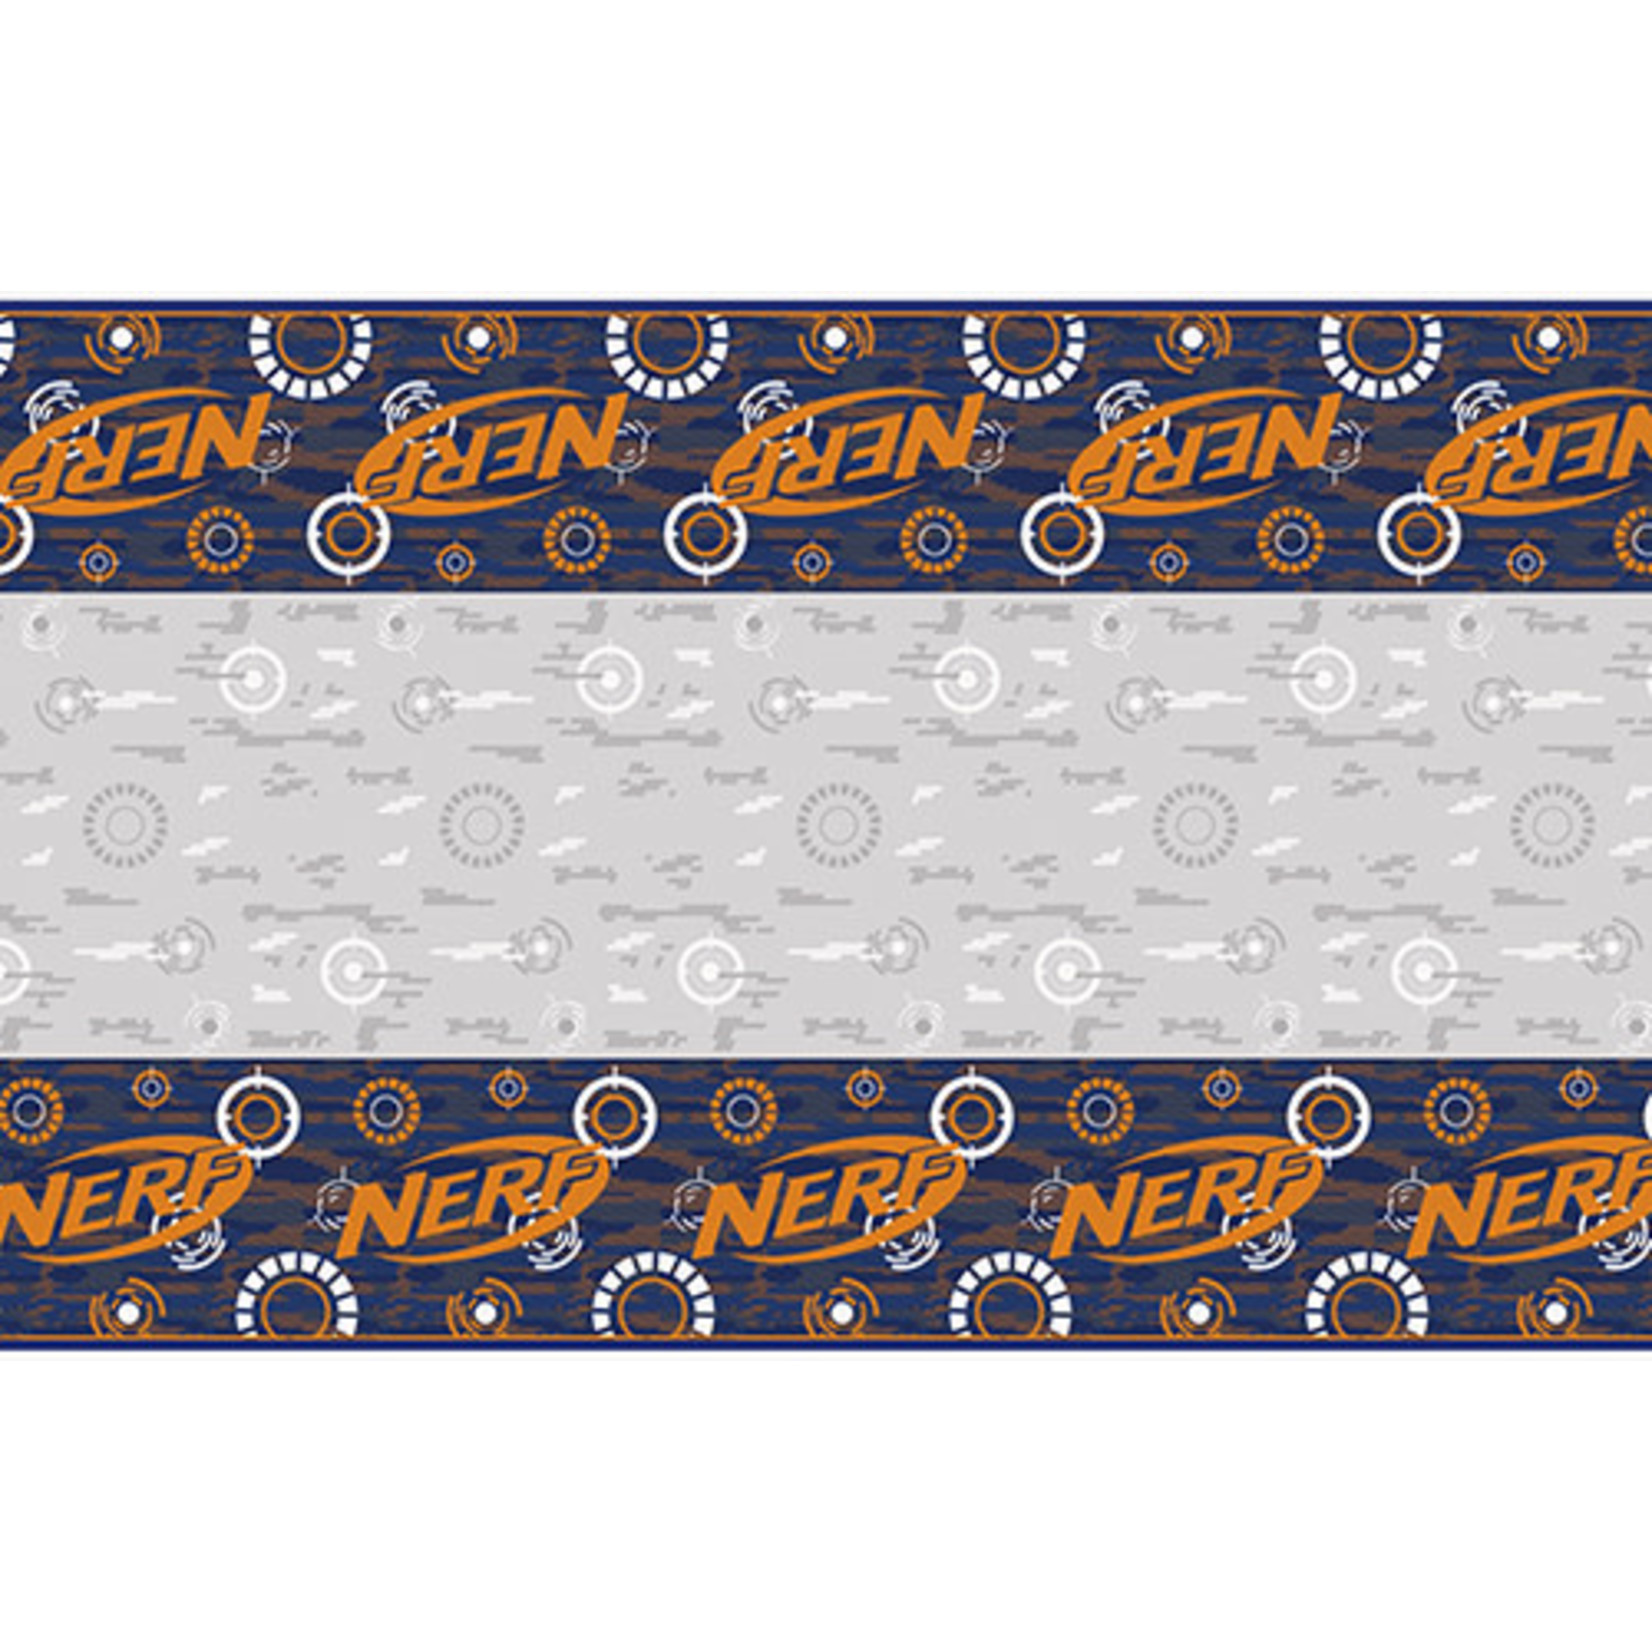 unique Nerf Tablecover - 54" x 84"